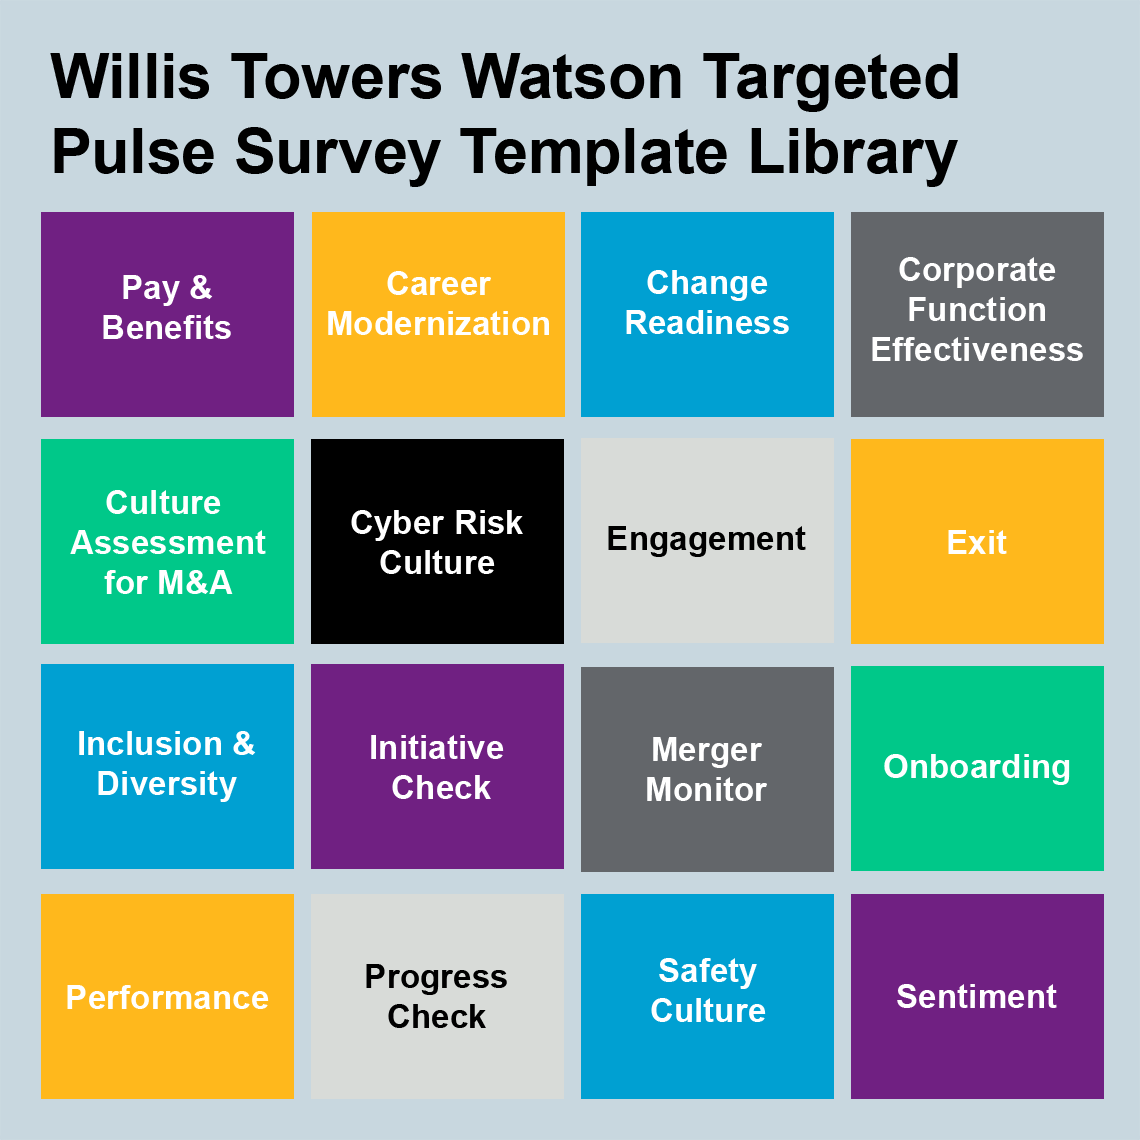 Willis Towers Watson Targeted Pulse Survey template library